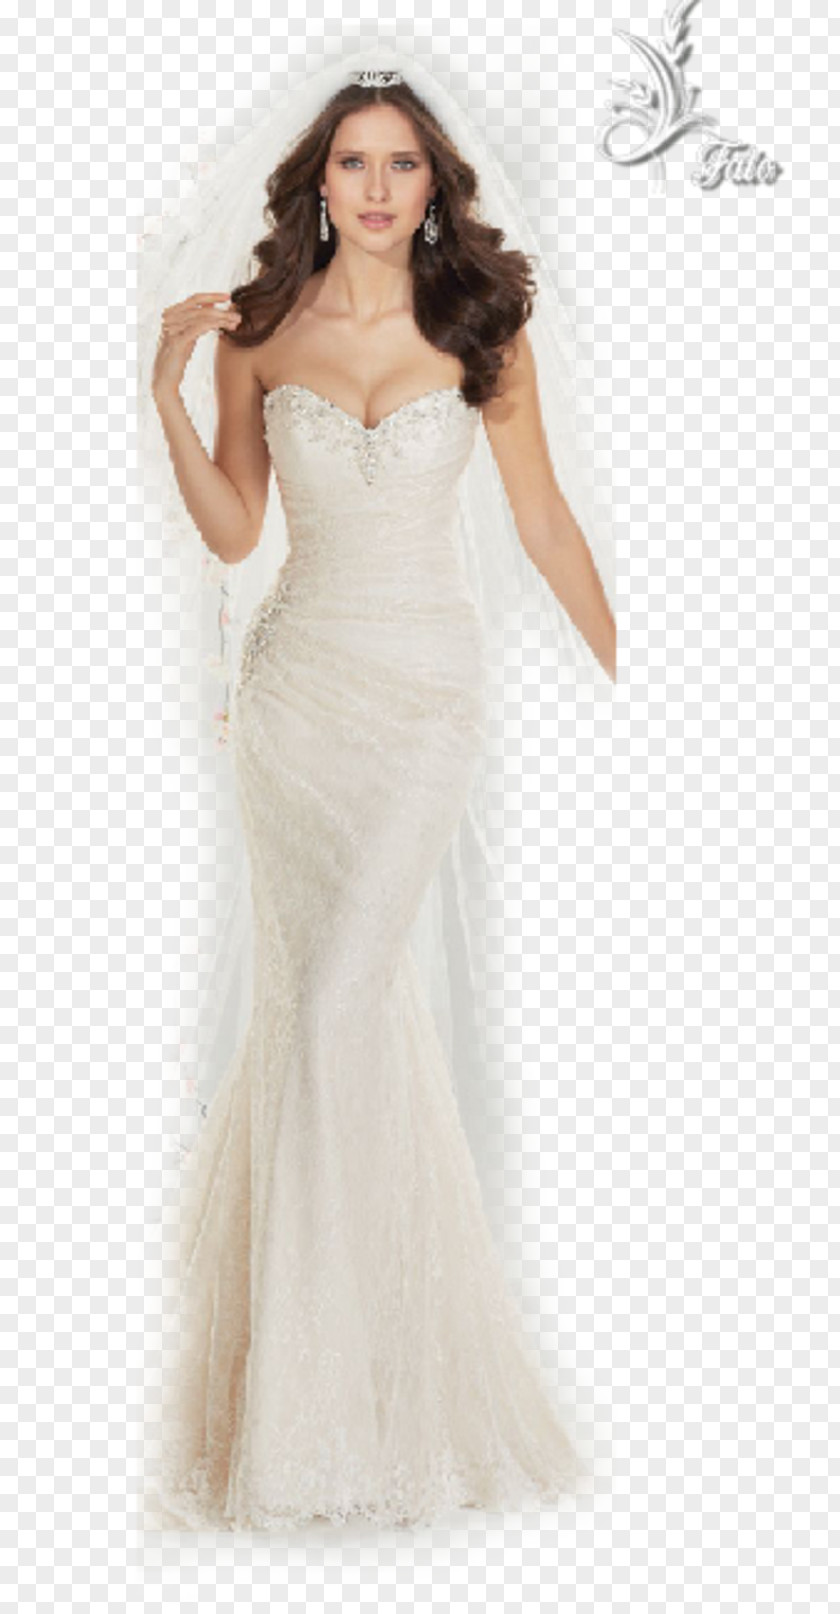 Dress Wedding Waist Cocktail Party PNG